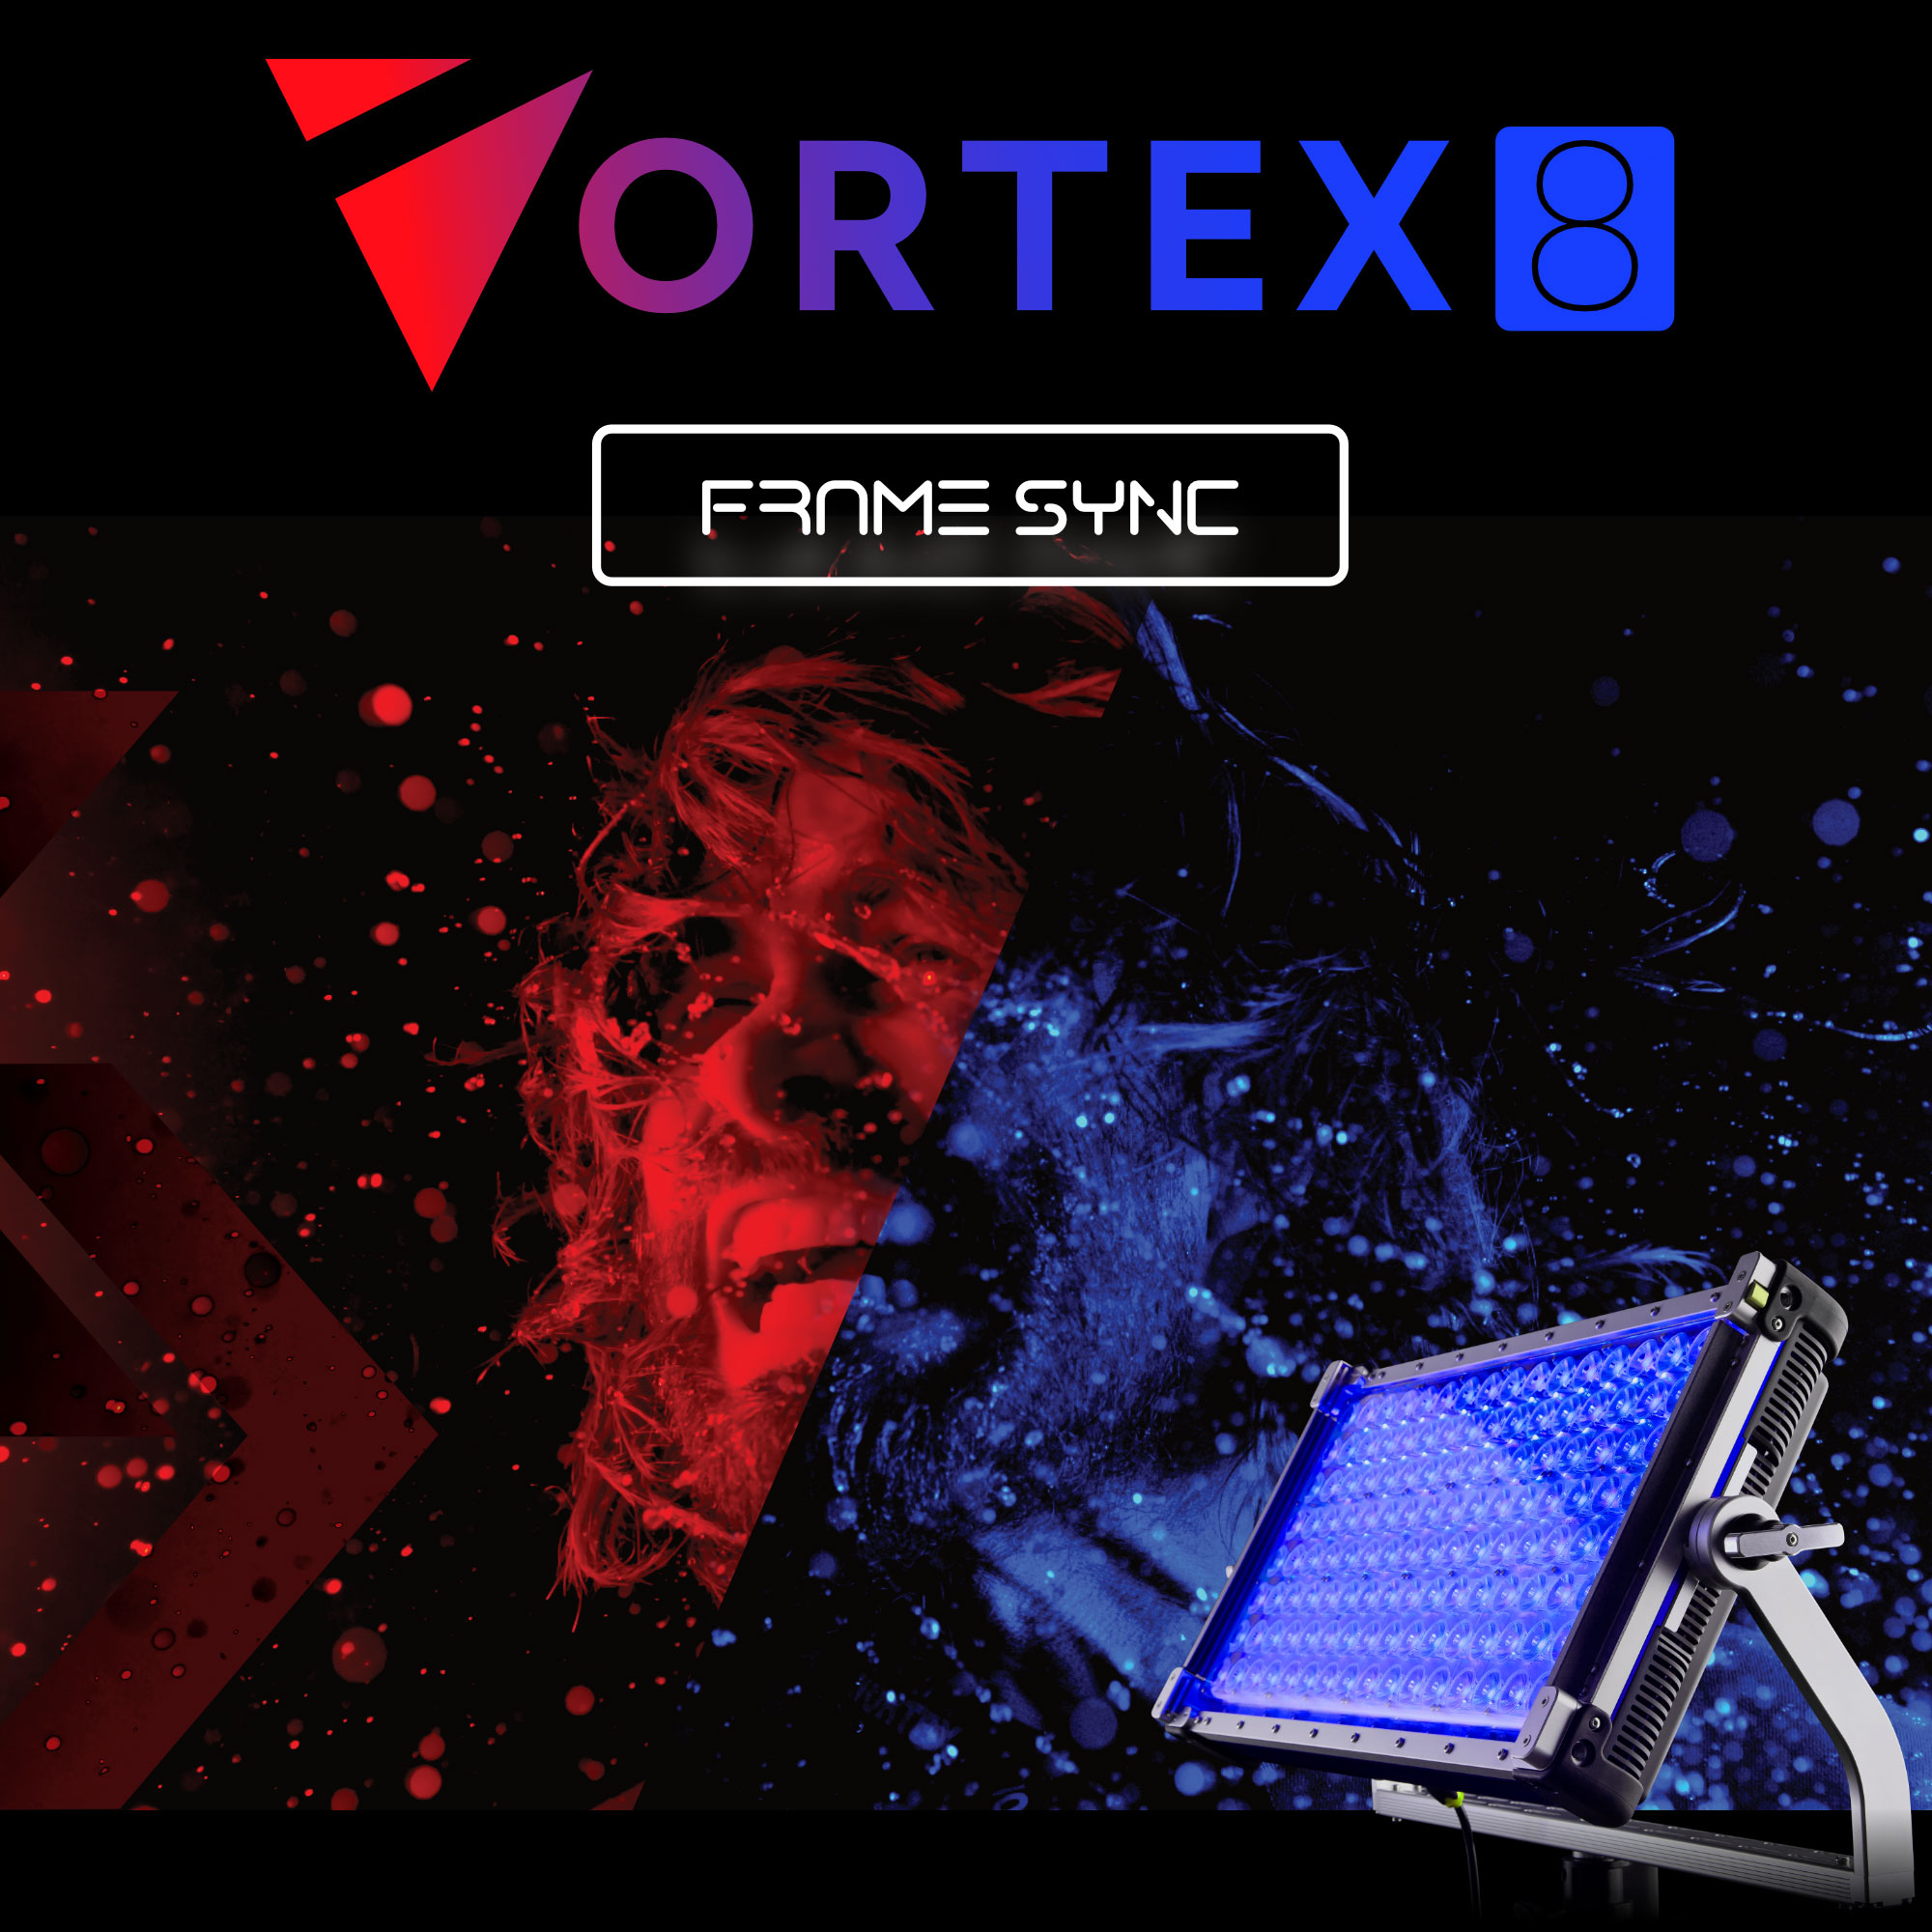 FrameSync for Vortex 8 enables industry-first in-camera effects